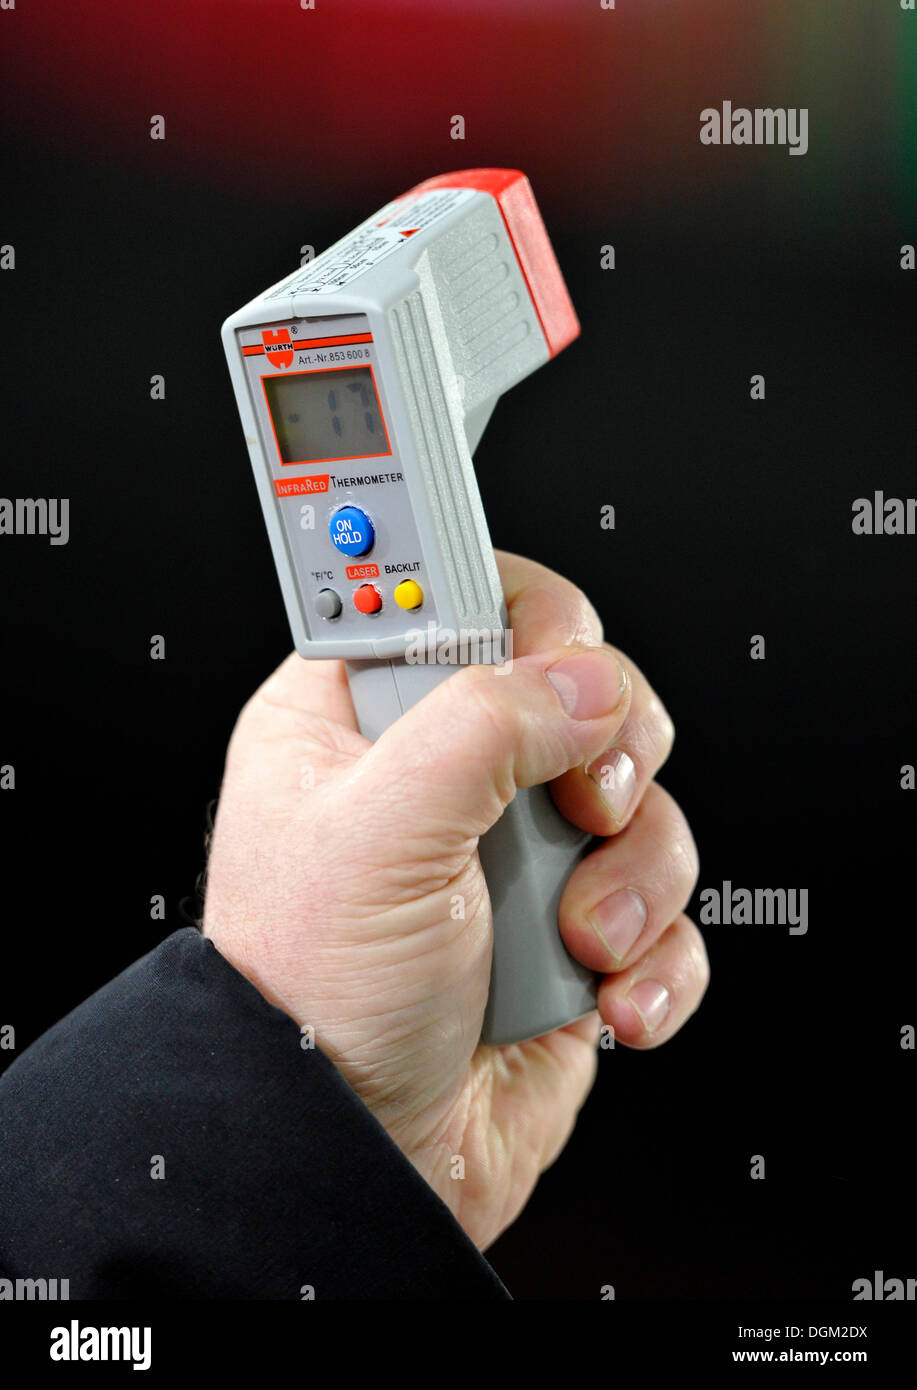 Measuring temperature of internal combustion Engine turbine by laser  infrared thermometer Stock Photo - Alamy